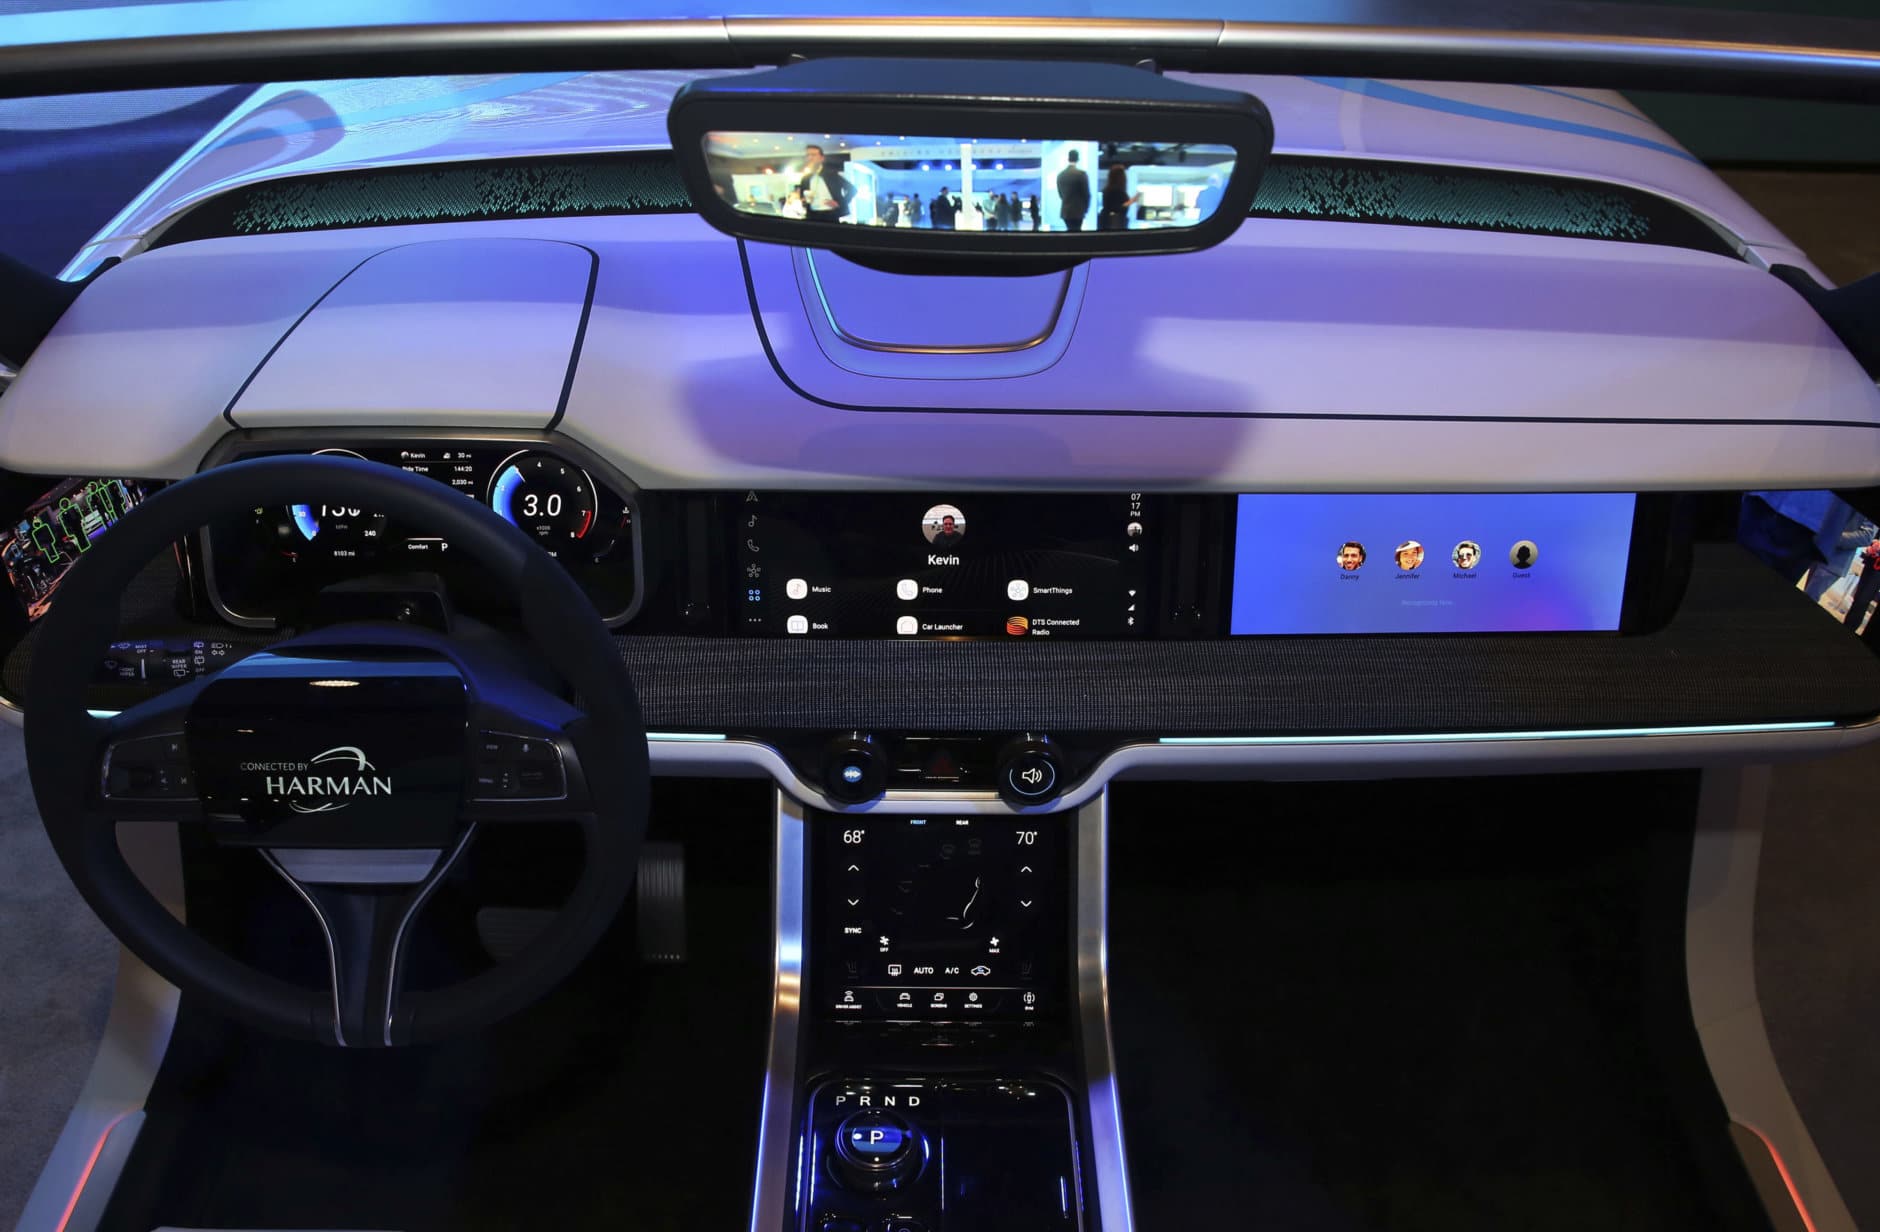 HARMAN displays premium digital cockpit with intelligent personalization for drivers and passengers during the 2019 Consumer Electronic Show (CES) at Hard Rock hotel-casino on Wednesday, Jan. 9, 2019, in Las Vegas. (Bizuayehu Tesfaye/AP Images for Harman)